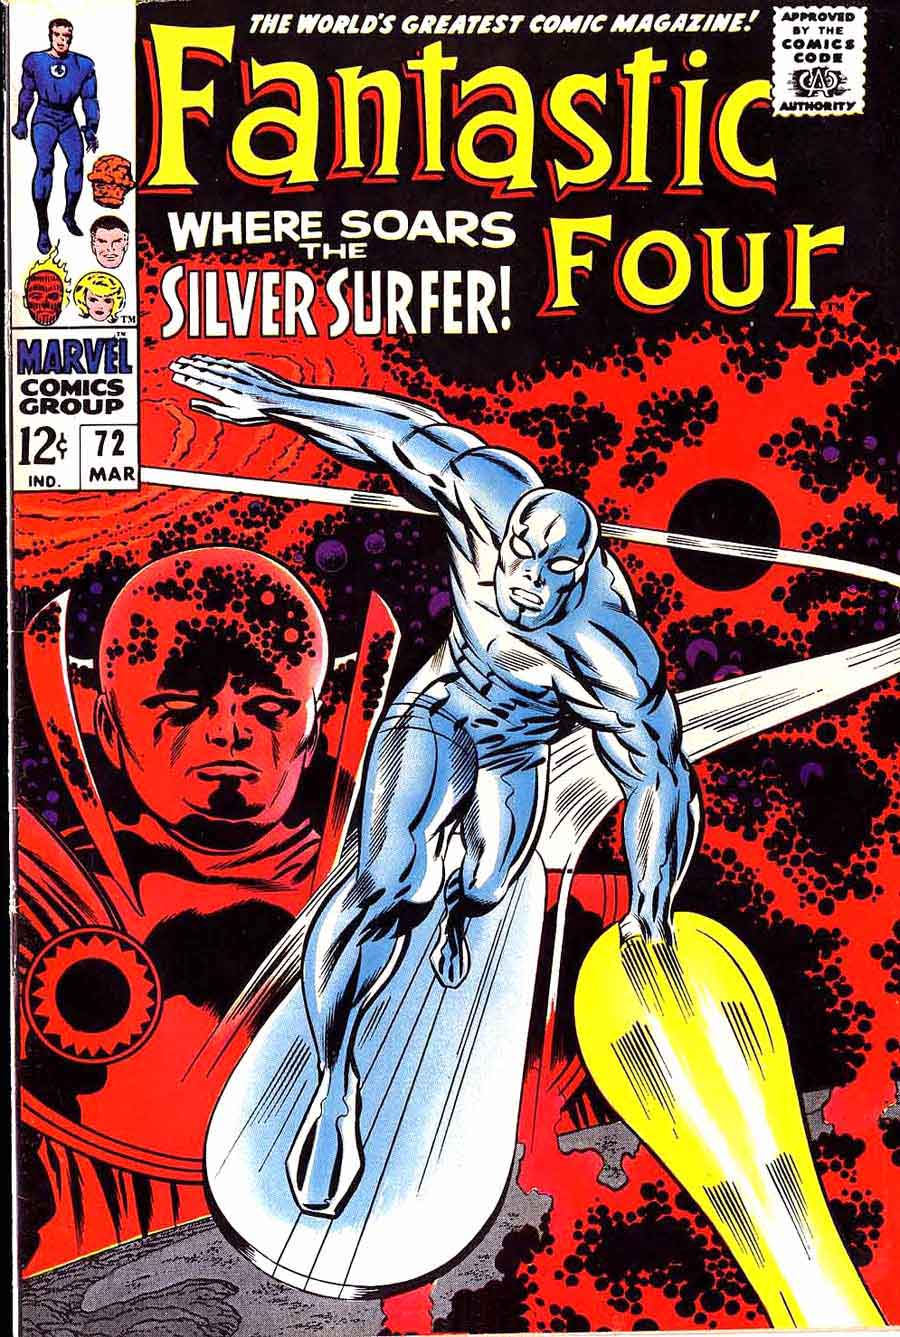 Fantastc Four v1 #72 silver surfer 1960s silver age comic book cover art by Jack Kirby